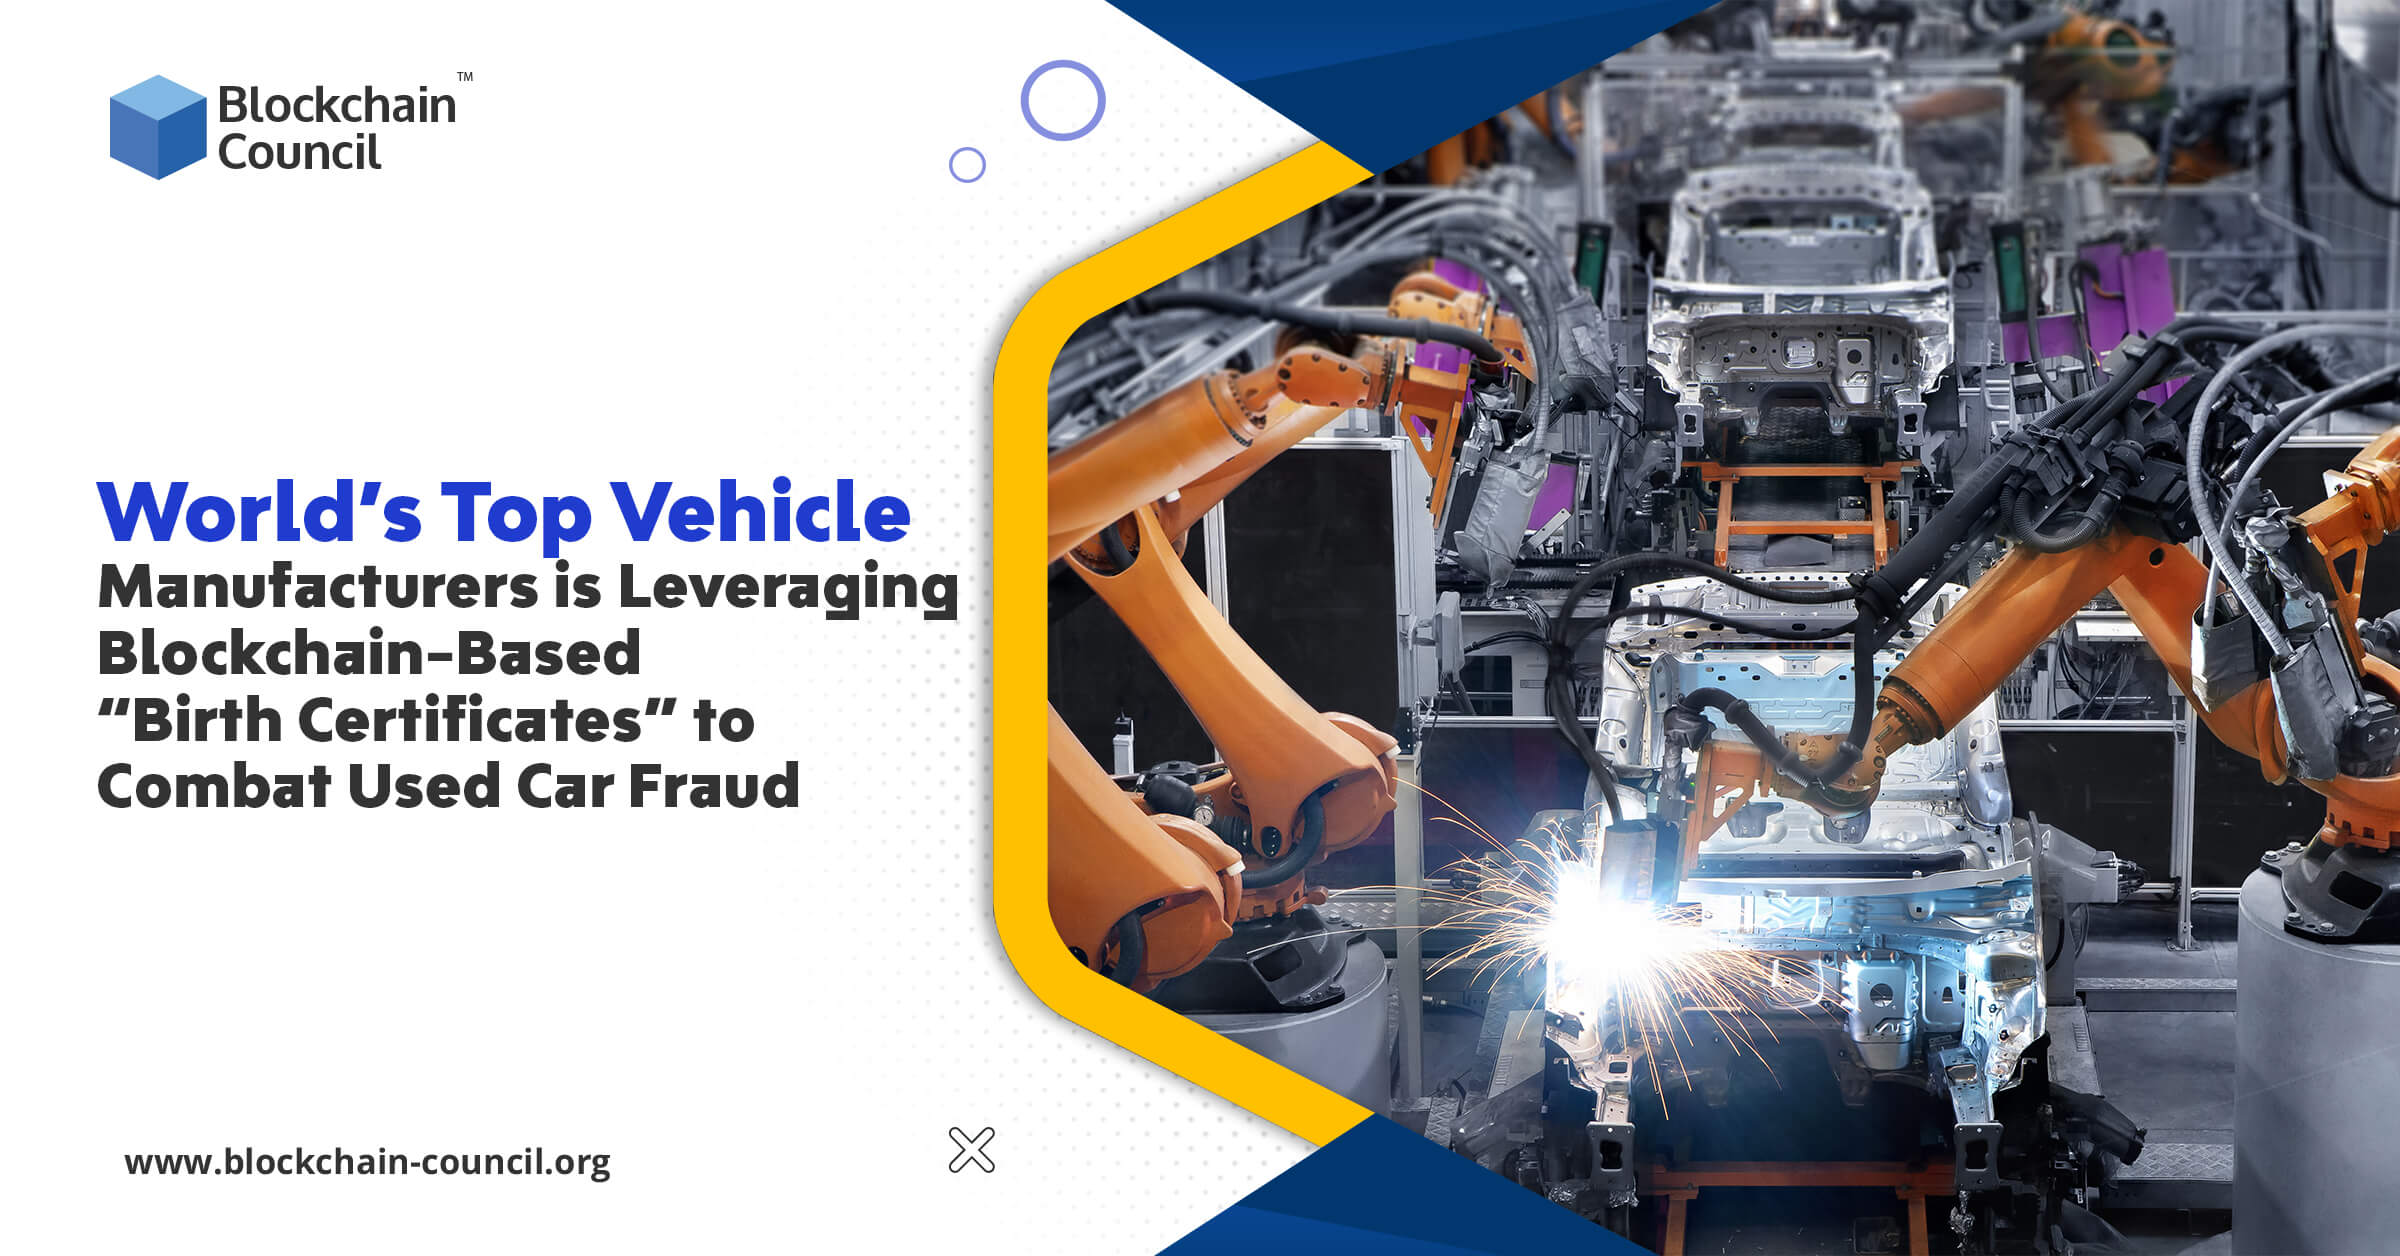 World’s Top Vehicle Manufacturers is Leveraging Blockchain-Based “Birth Certificates” to Combat Used Car Fraud